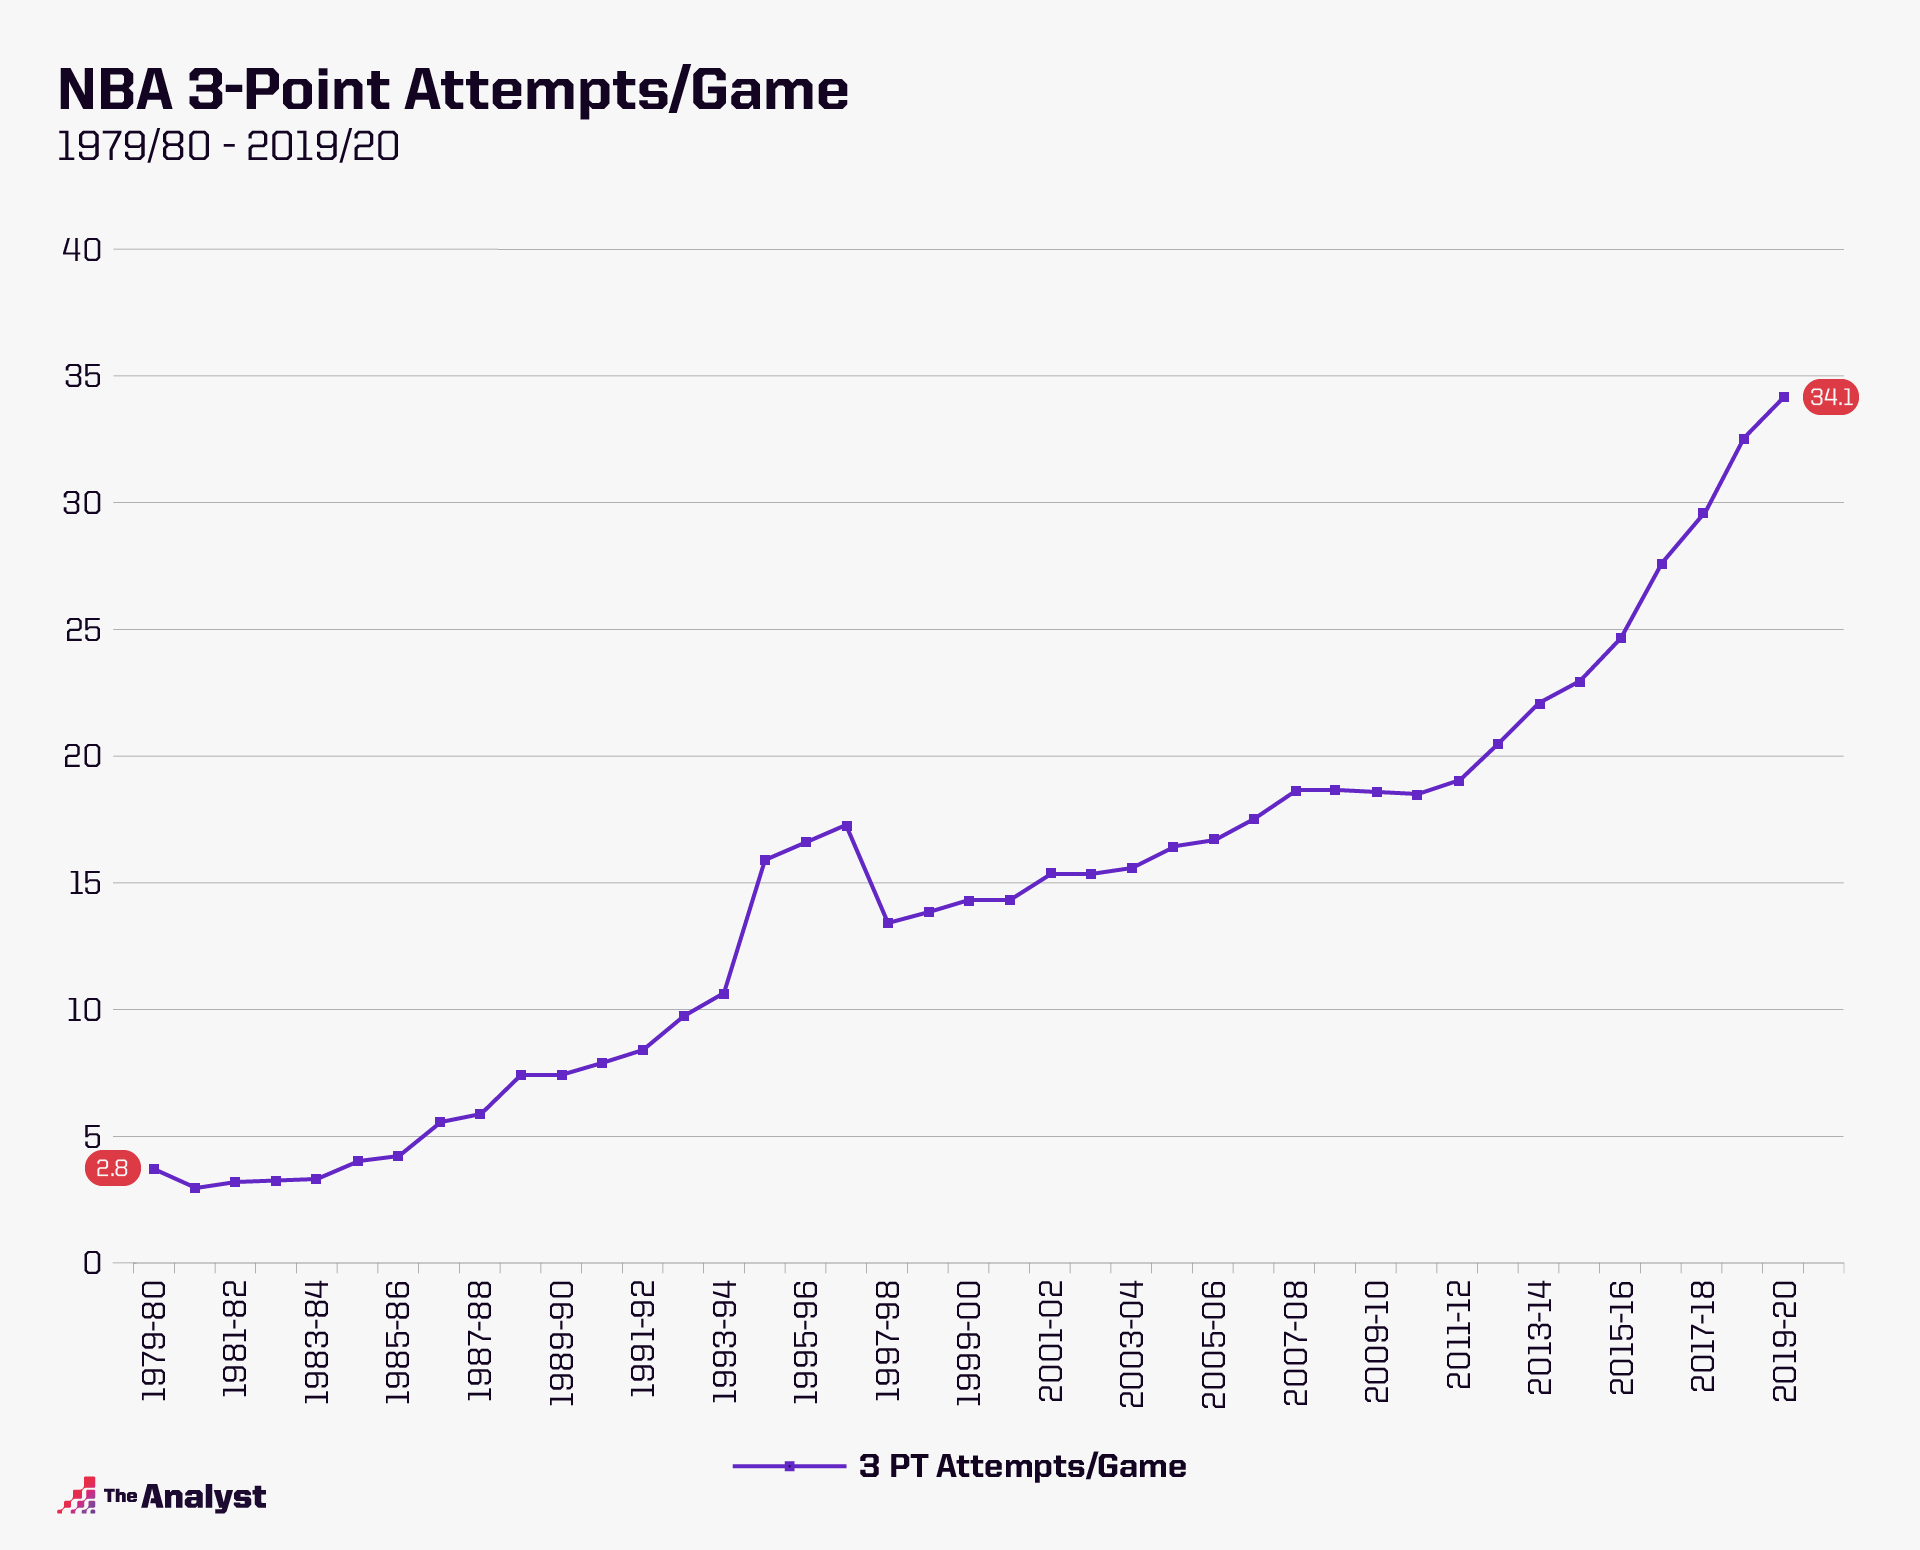 NBA 3-point attempts per game